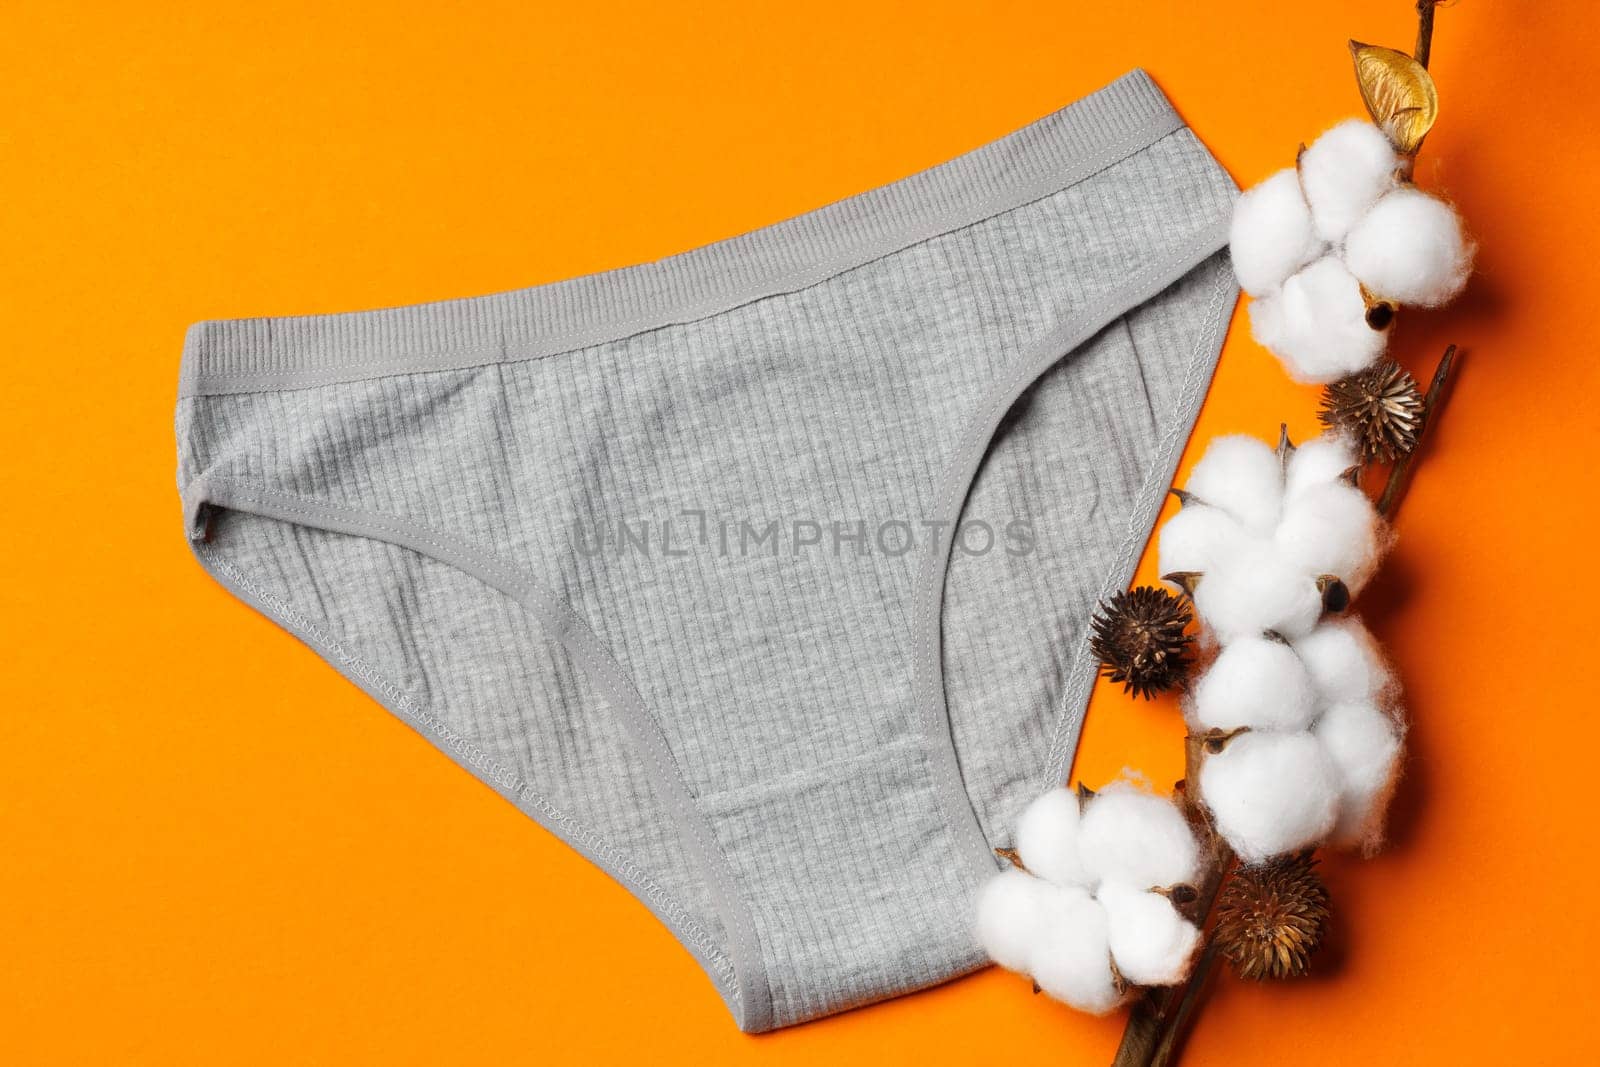 Cotton flowers and women's panties on color paper background close up